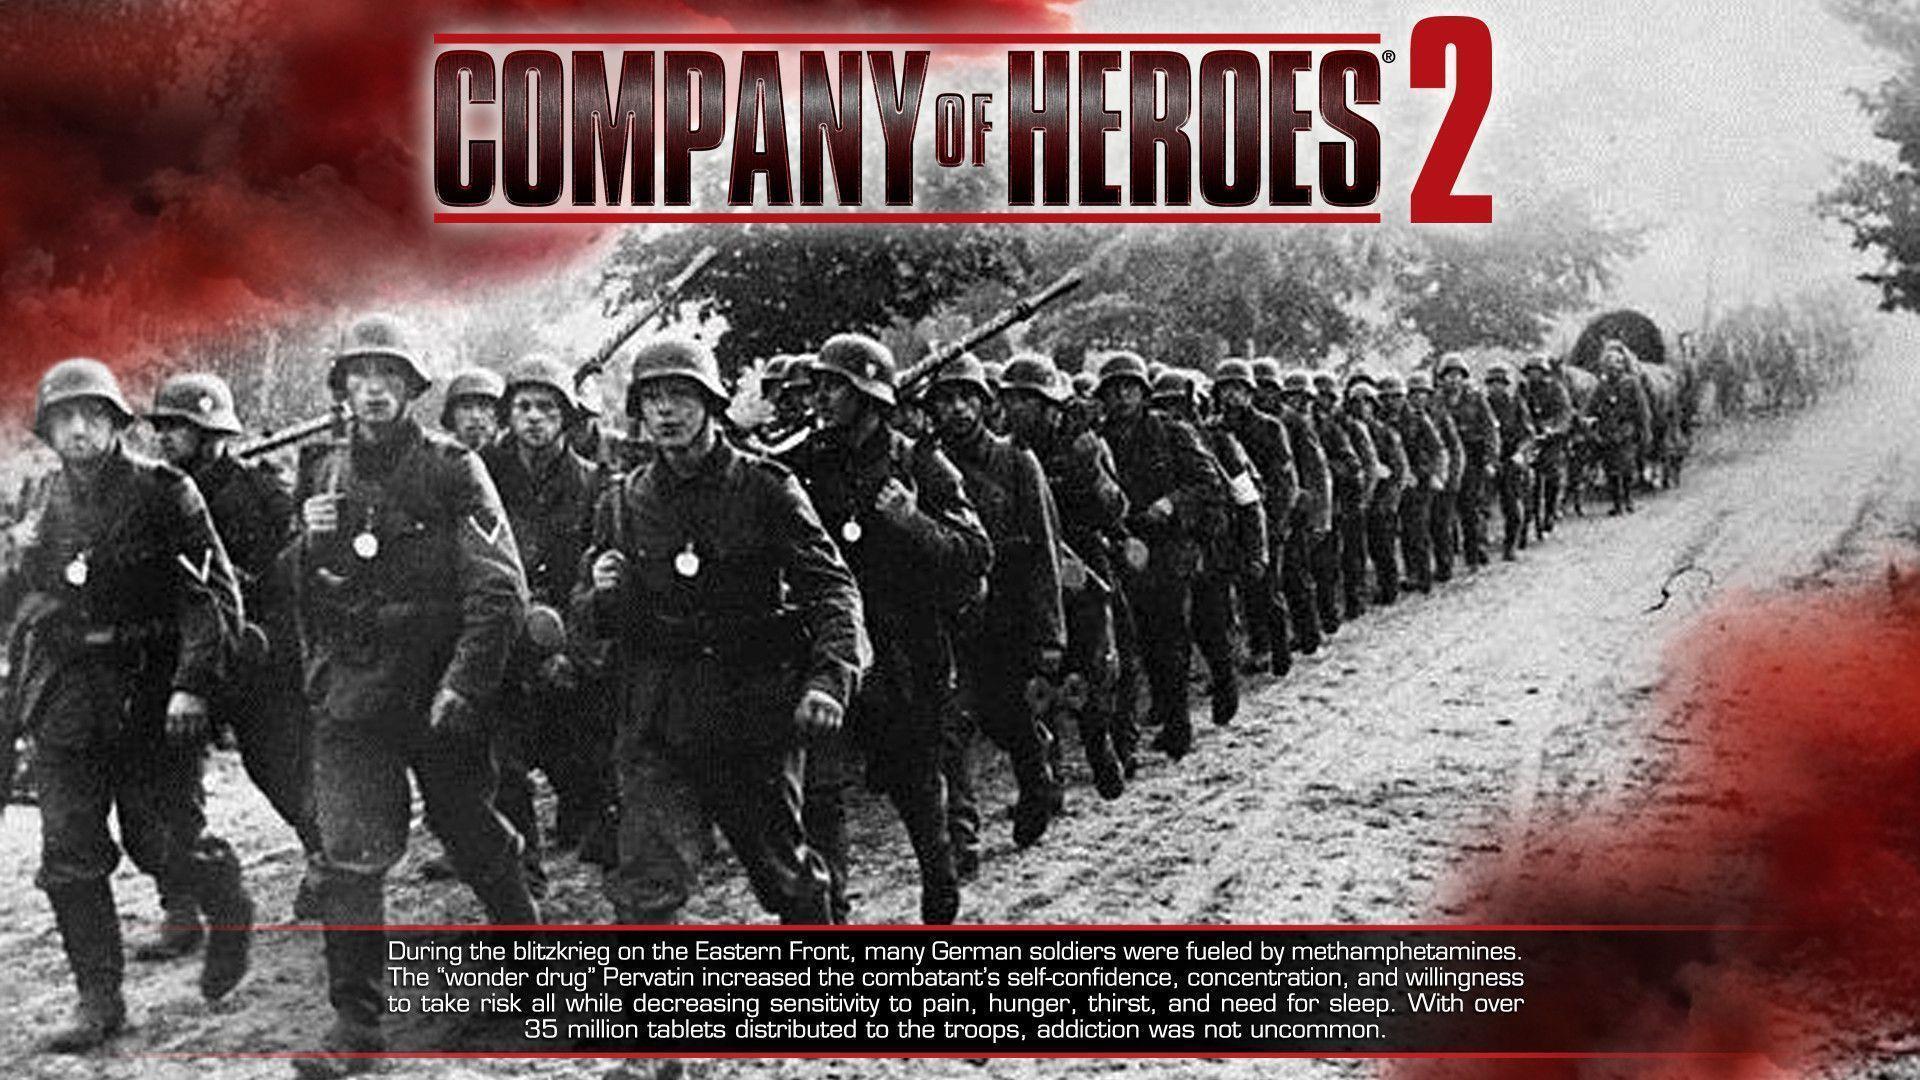 company of heroes 2 wallpaper